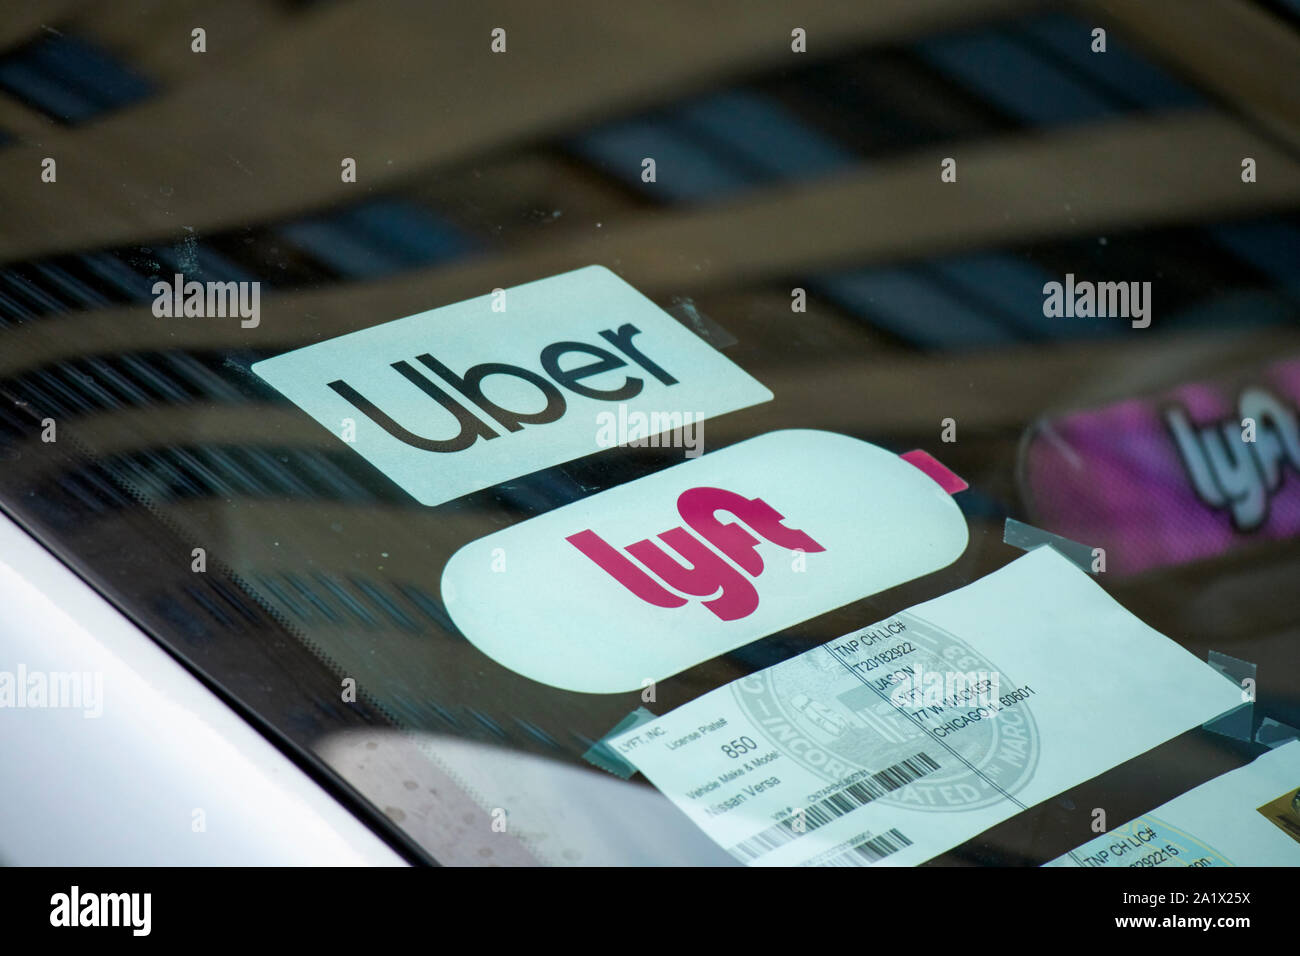 stickers in the windshield of a cab for both uber and lyft chicago illinois united states of america Stock Photo